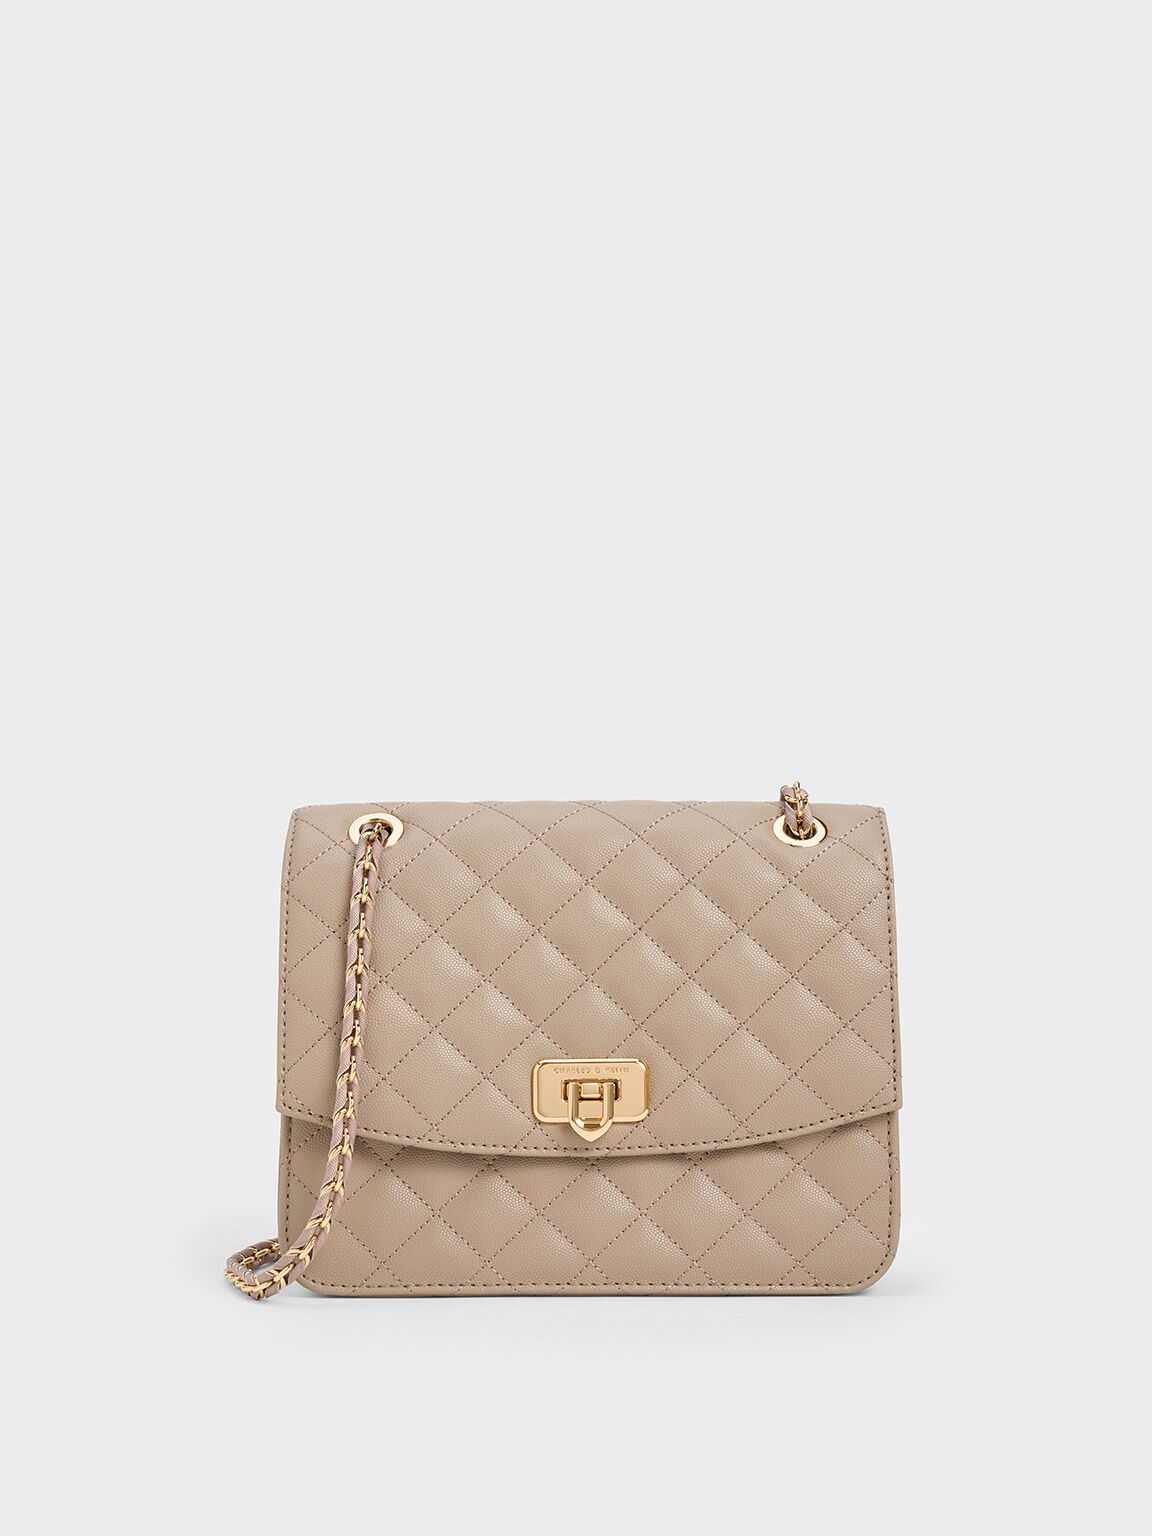 S dark taupe leather flap bag